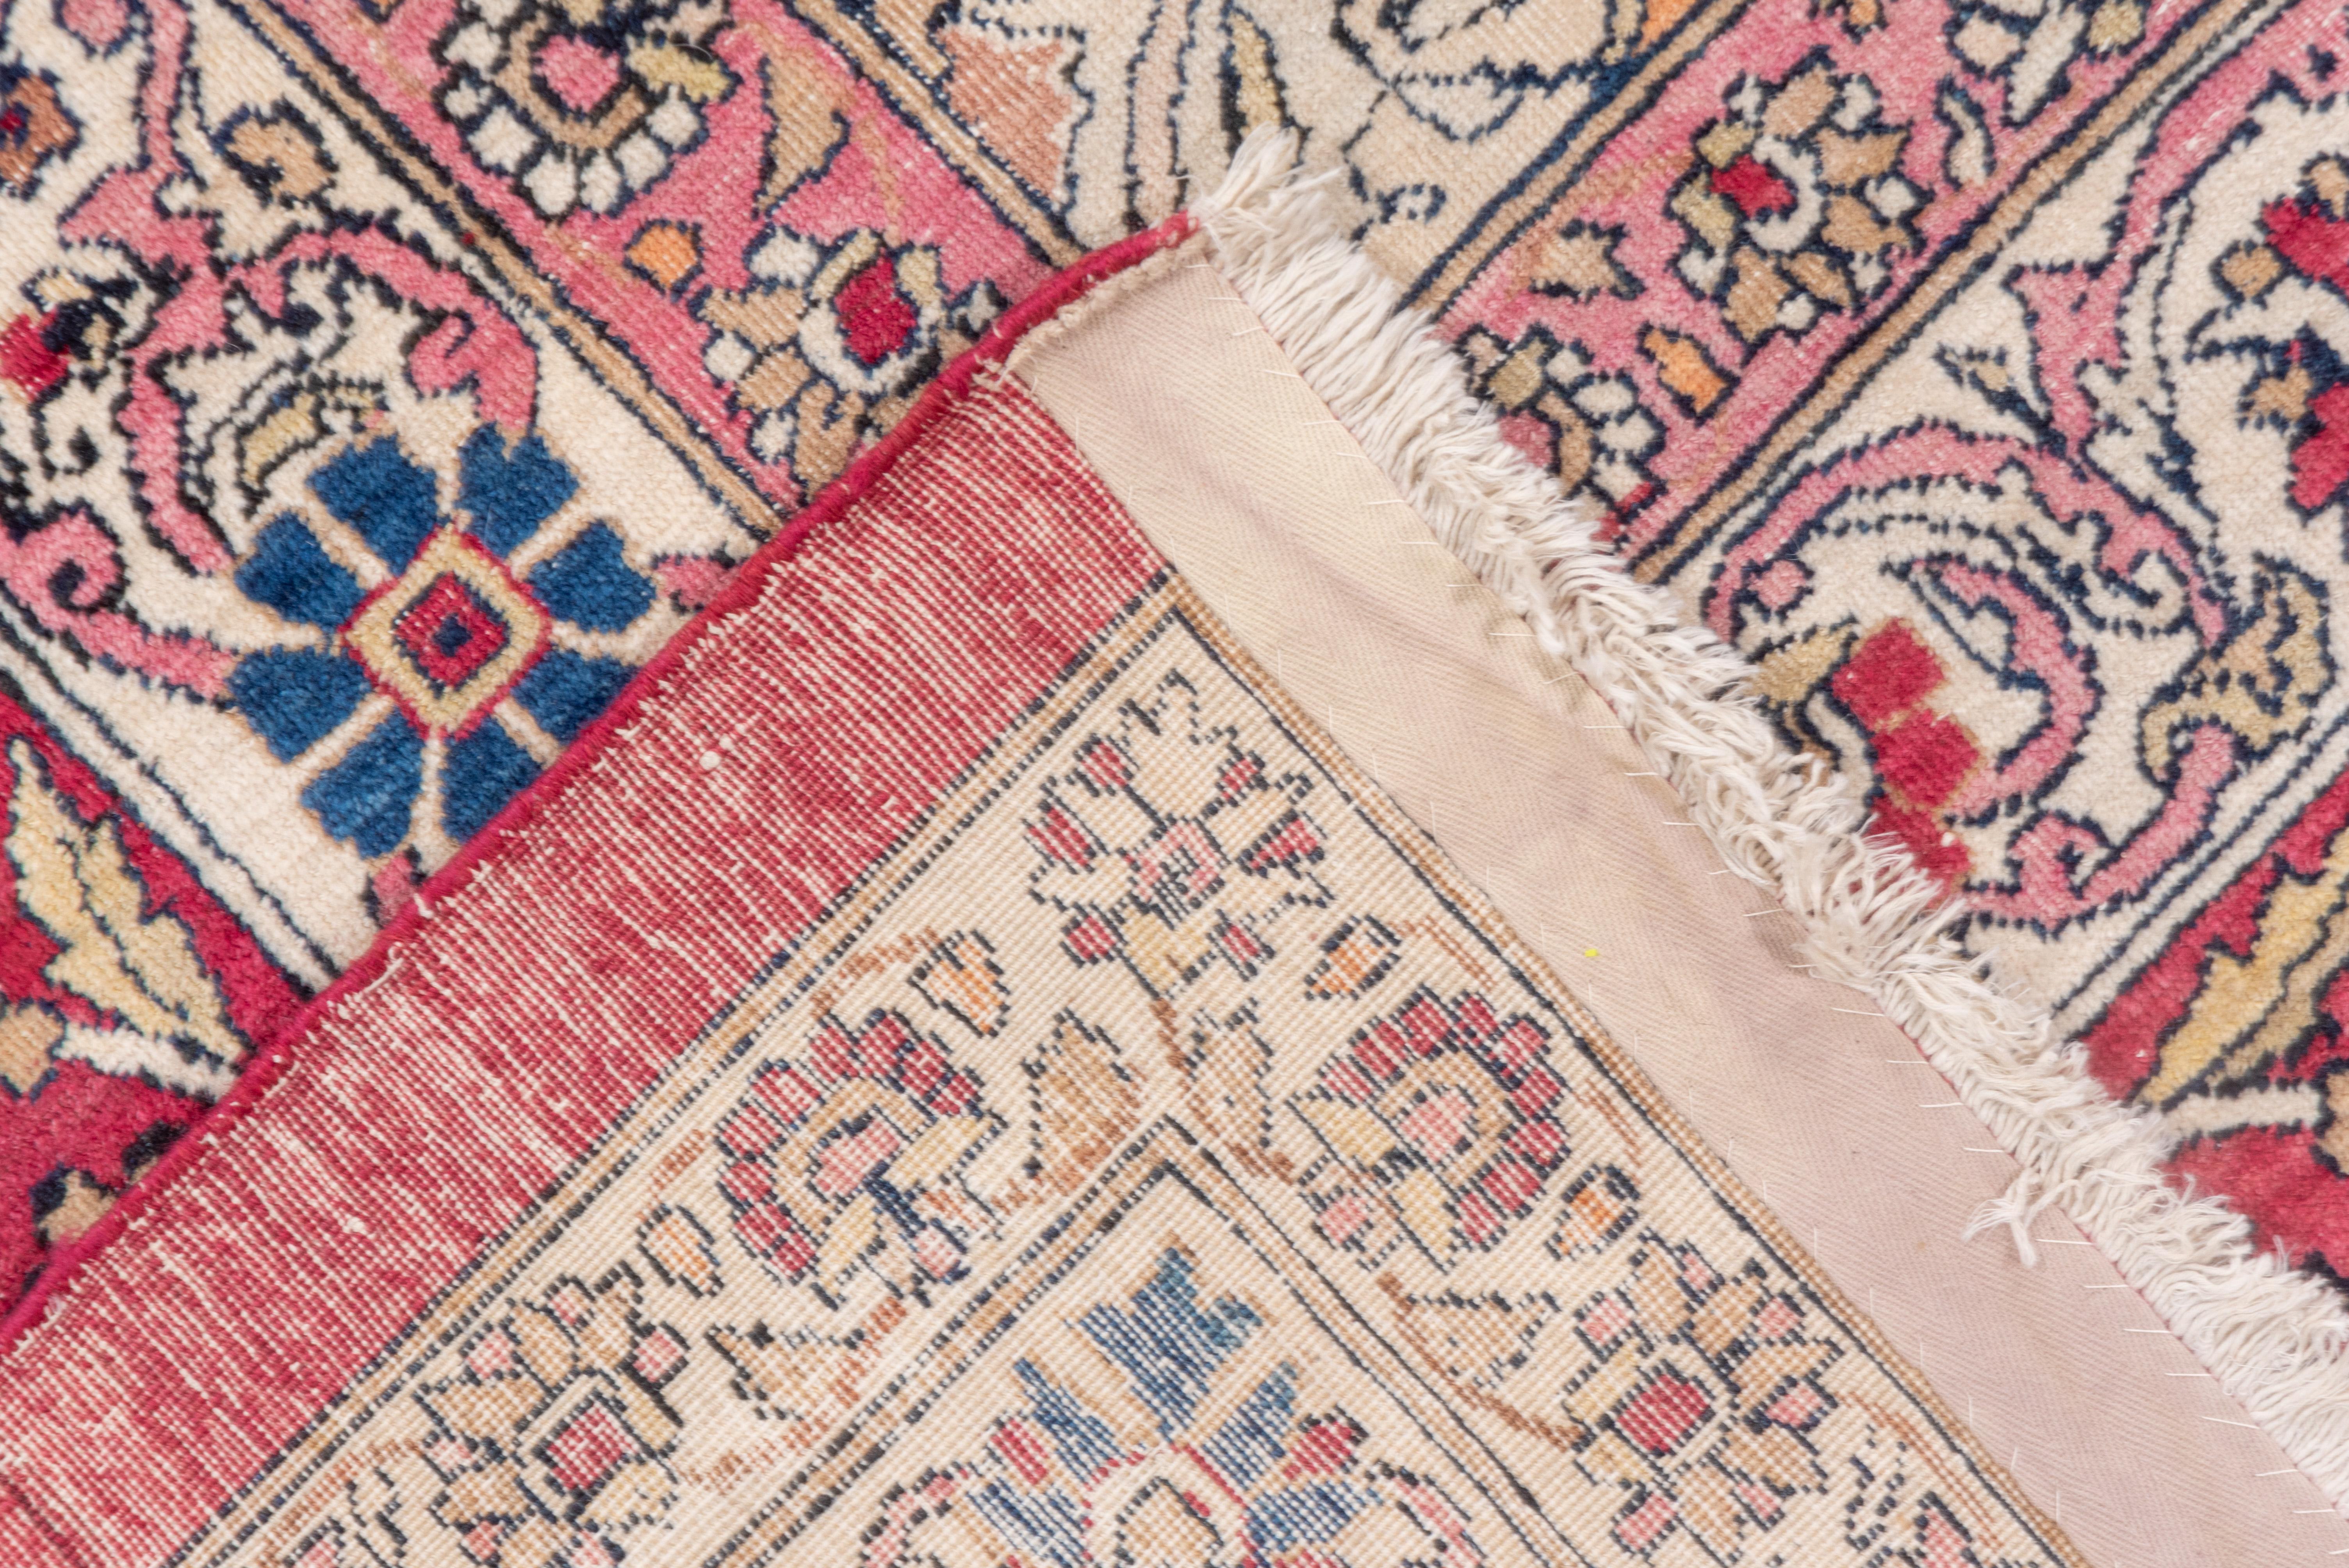 Late 19th Century Antique Persian Lavar Kerman Carpet, Ecru All-Over Field, Red Pink Borders For Sale